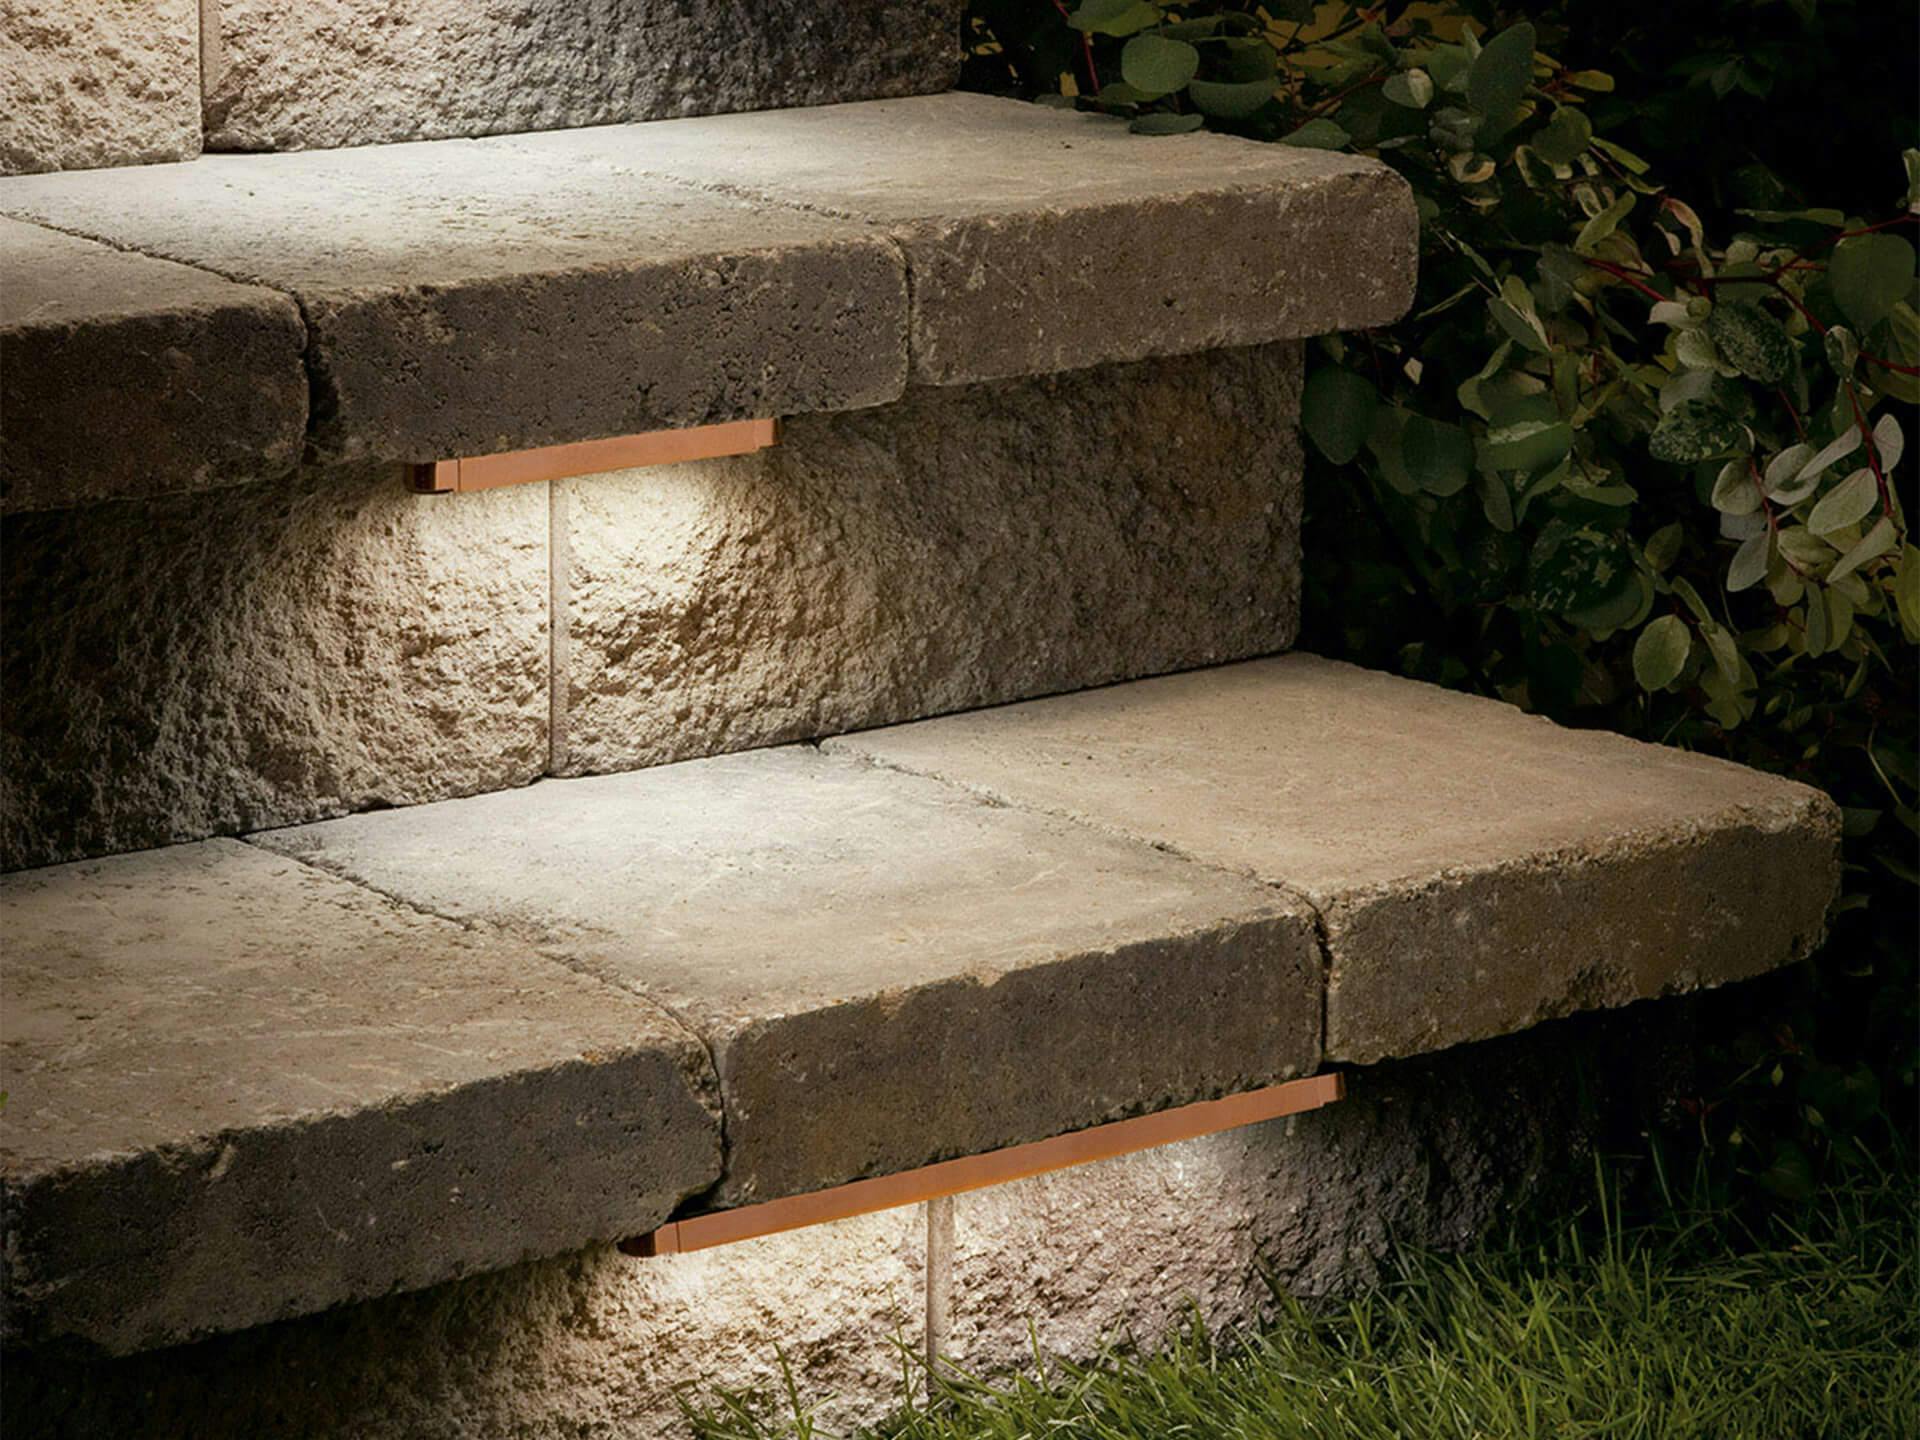 Stone stairs outside at night with lights downlighting each step